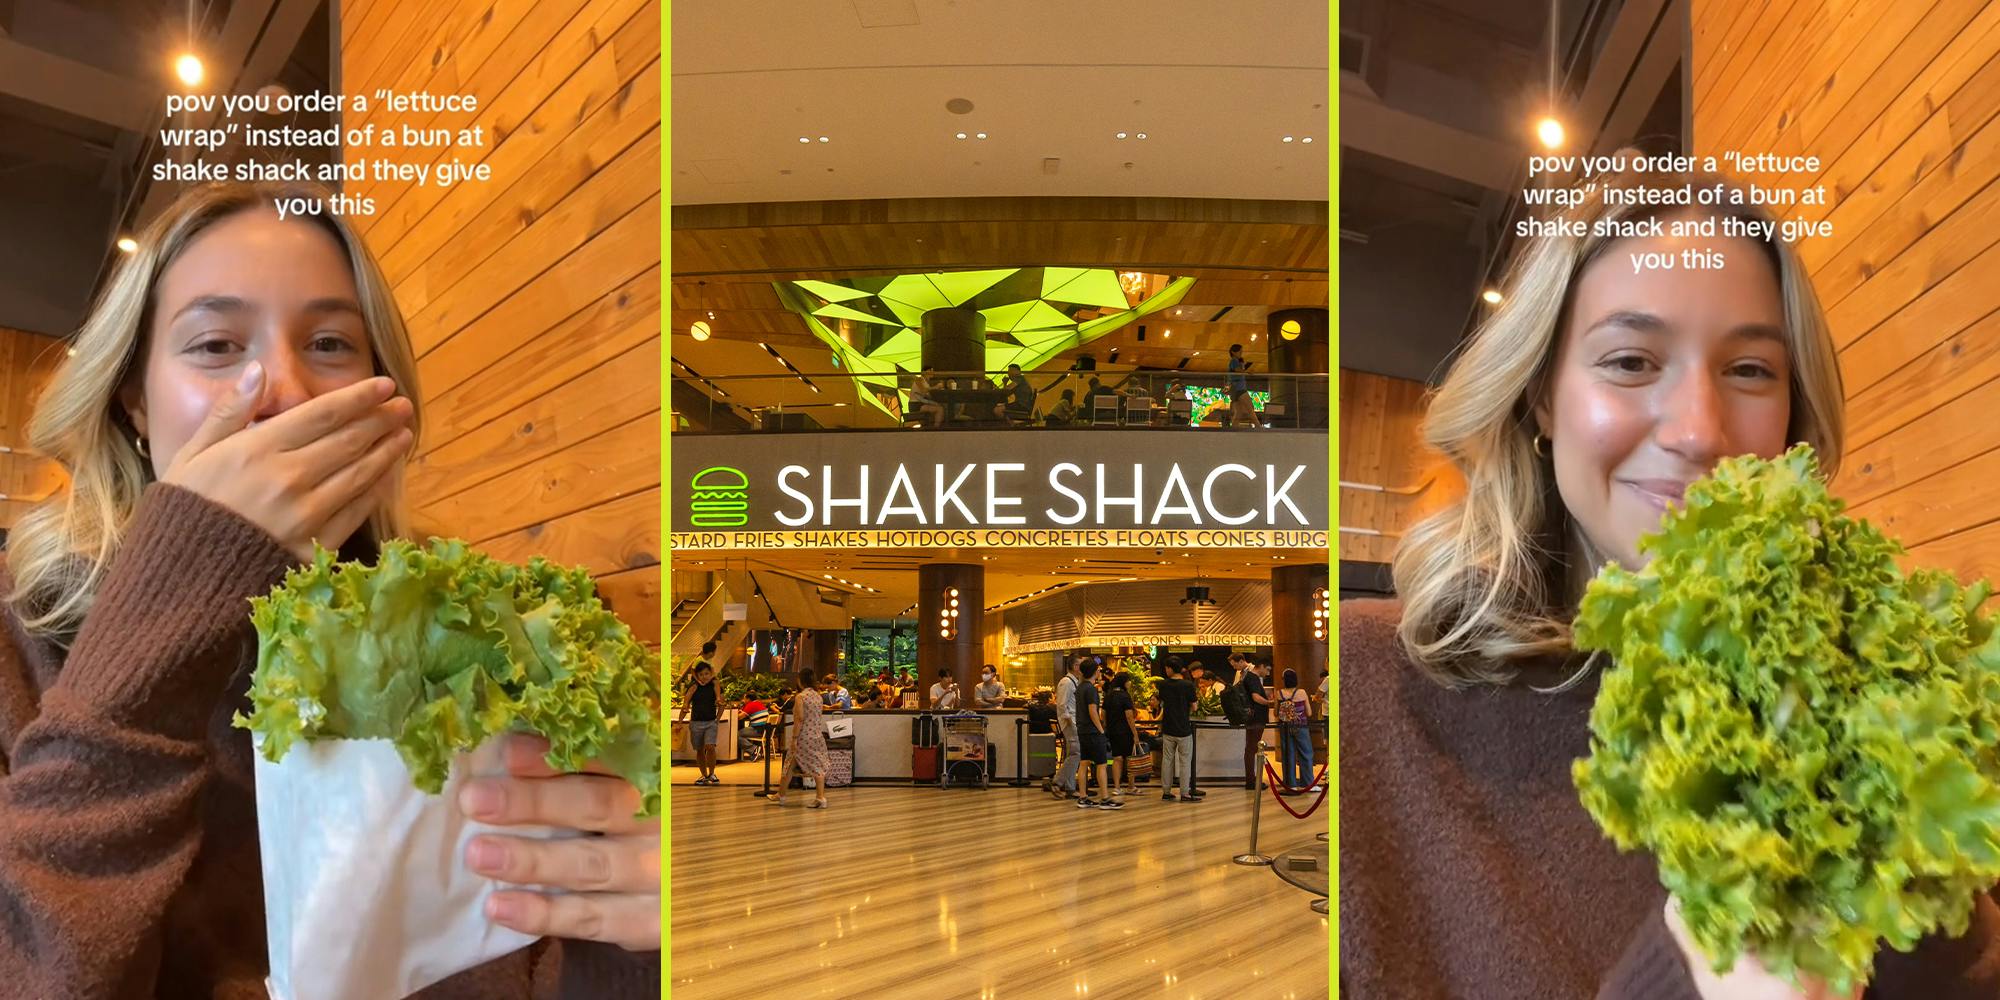 Customer orders lettuce wrap at Shake Shack, gets more than she bargained for